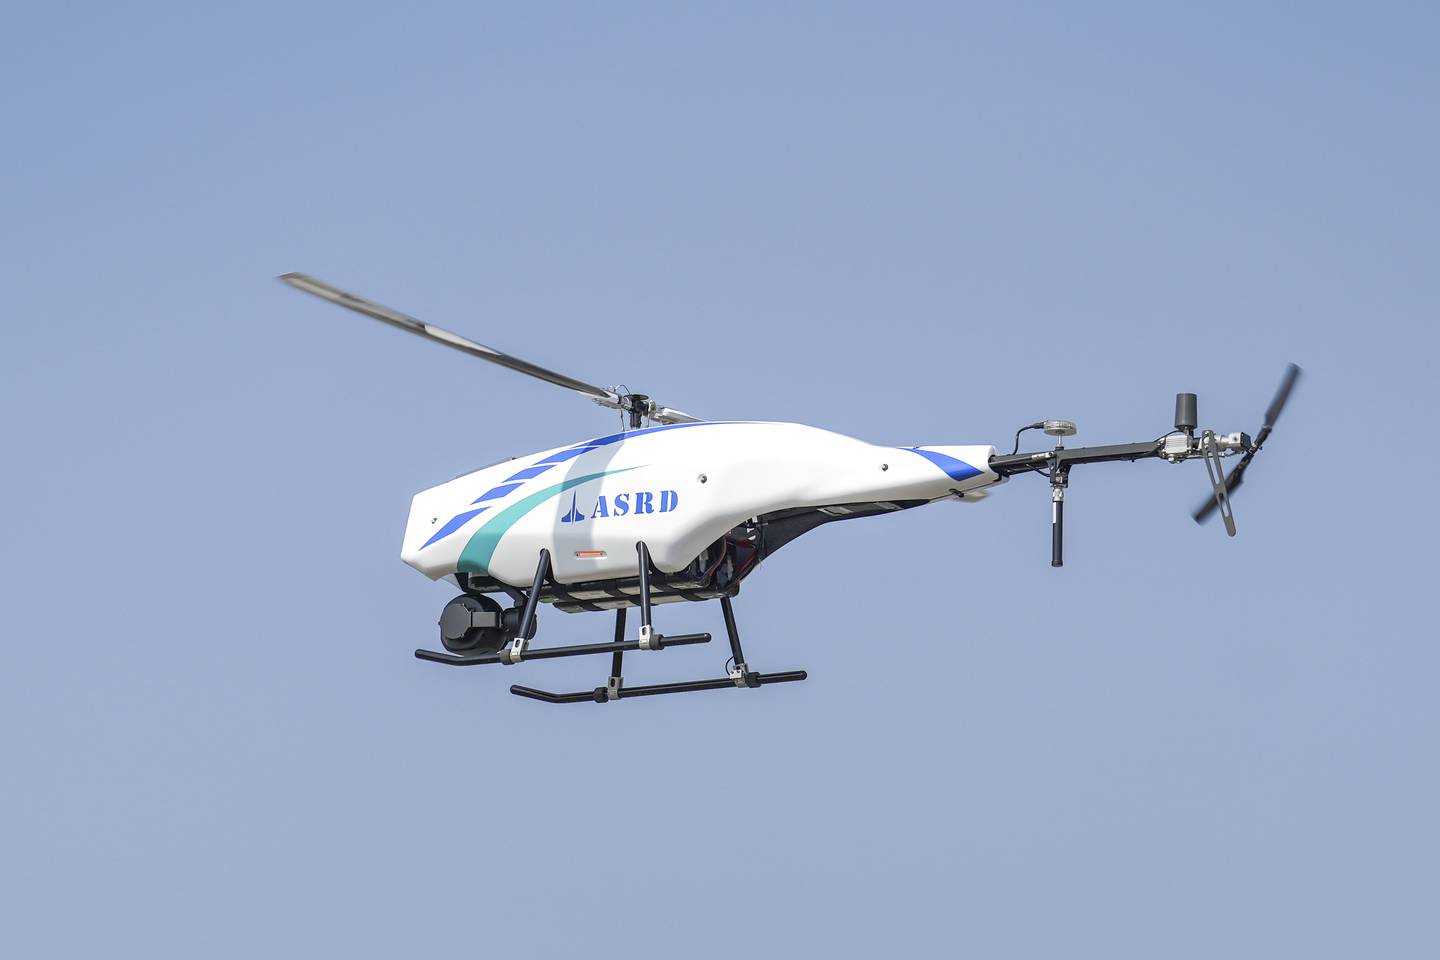 A helicopter drone is flown during a demonstration for members of the media at the National Chung-Shan Institute of Science and Technology in Taichung in central Taiwan on Tuesday, Nov. 15, 2022.